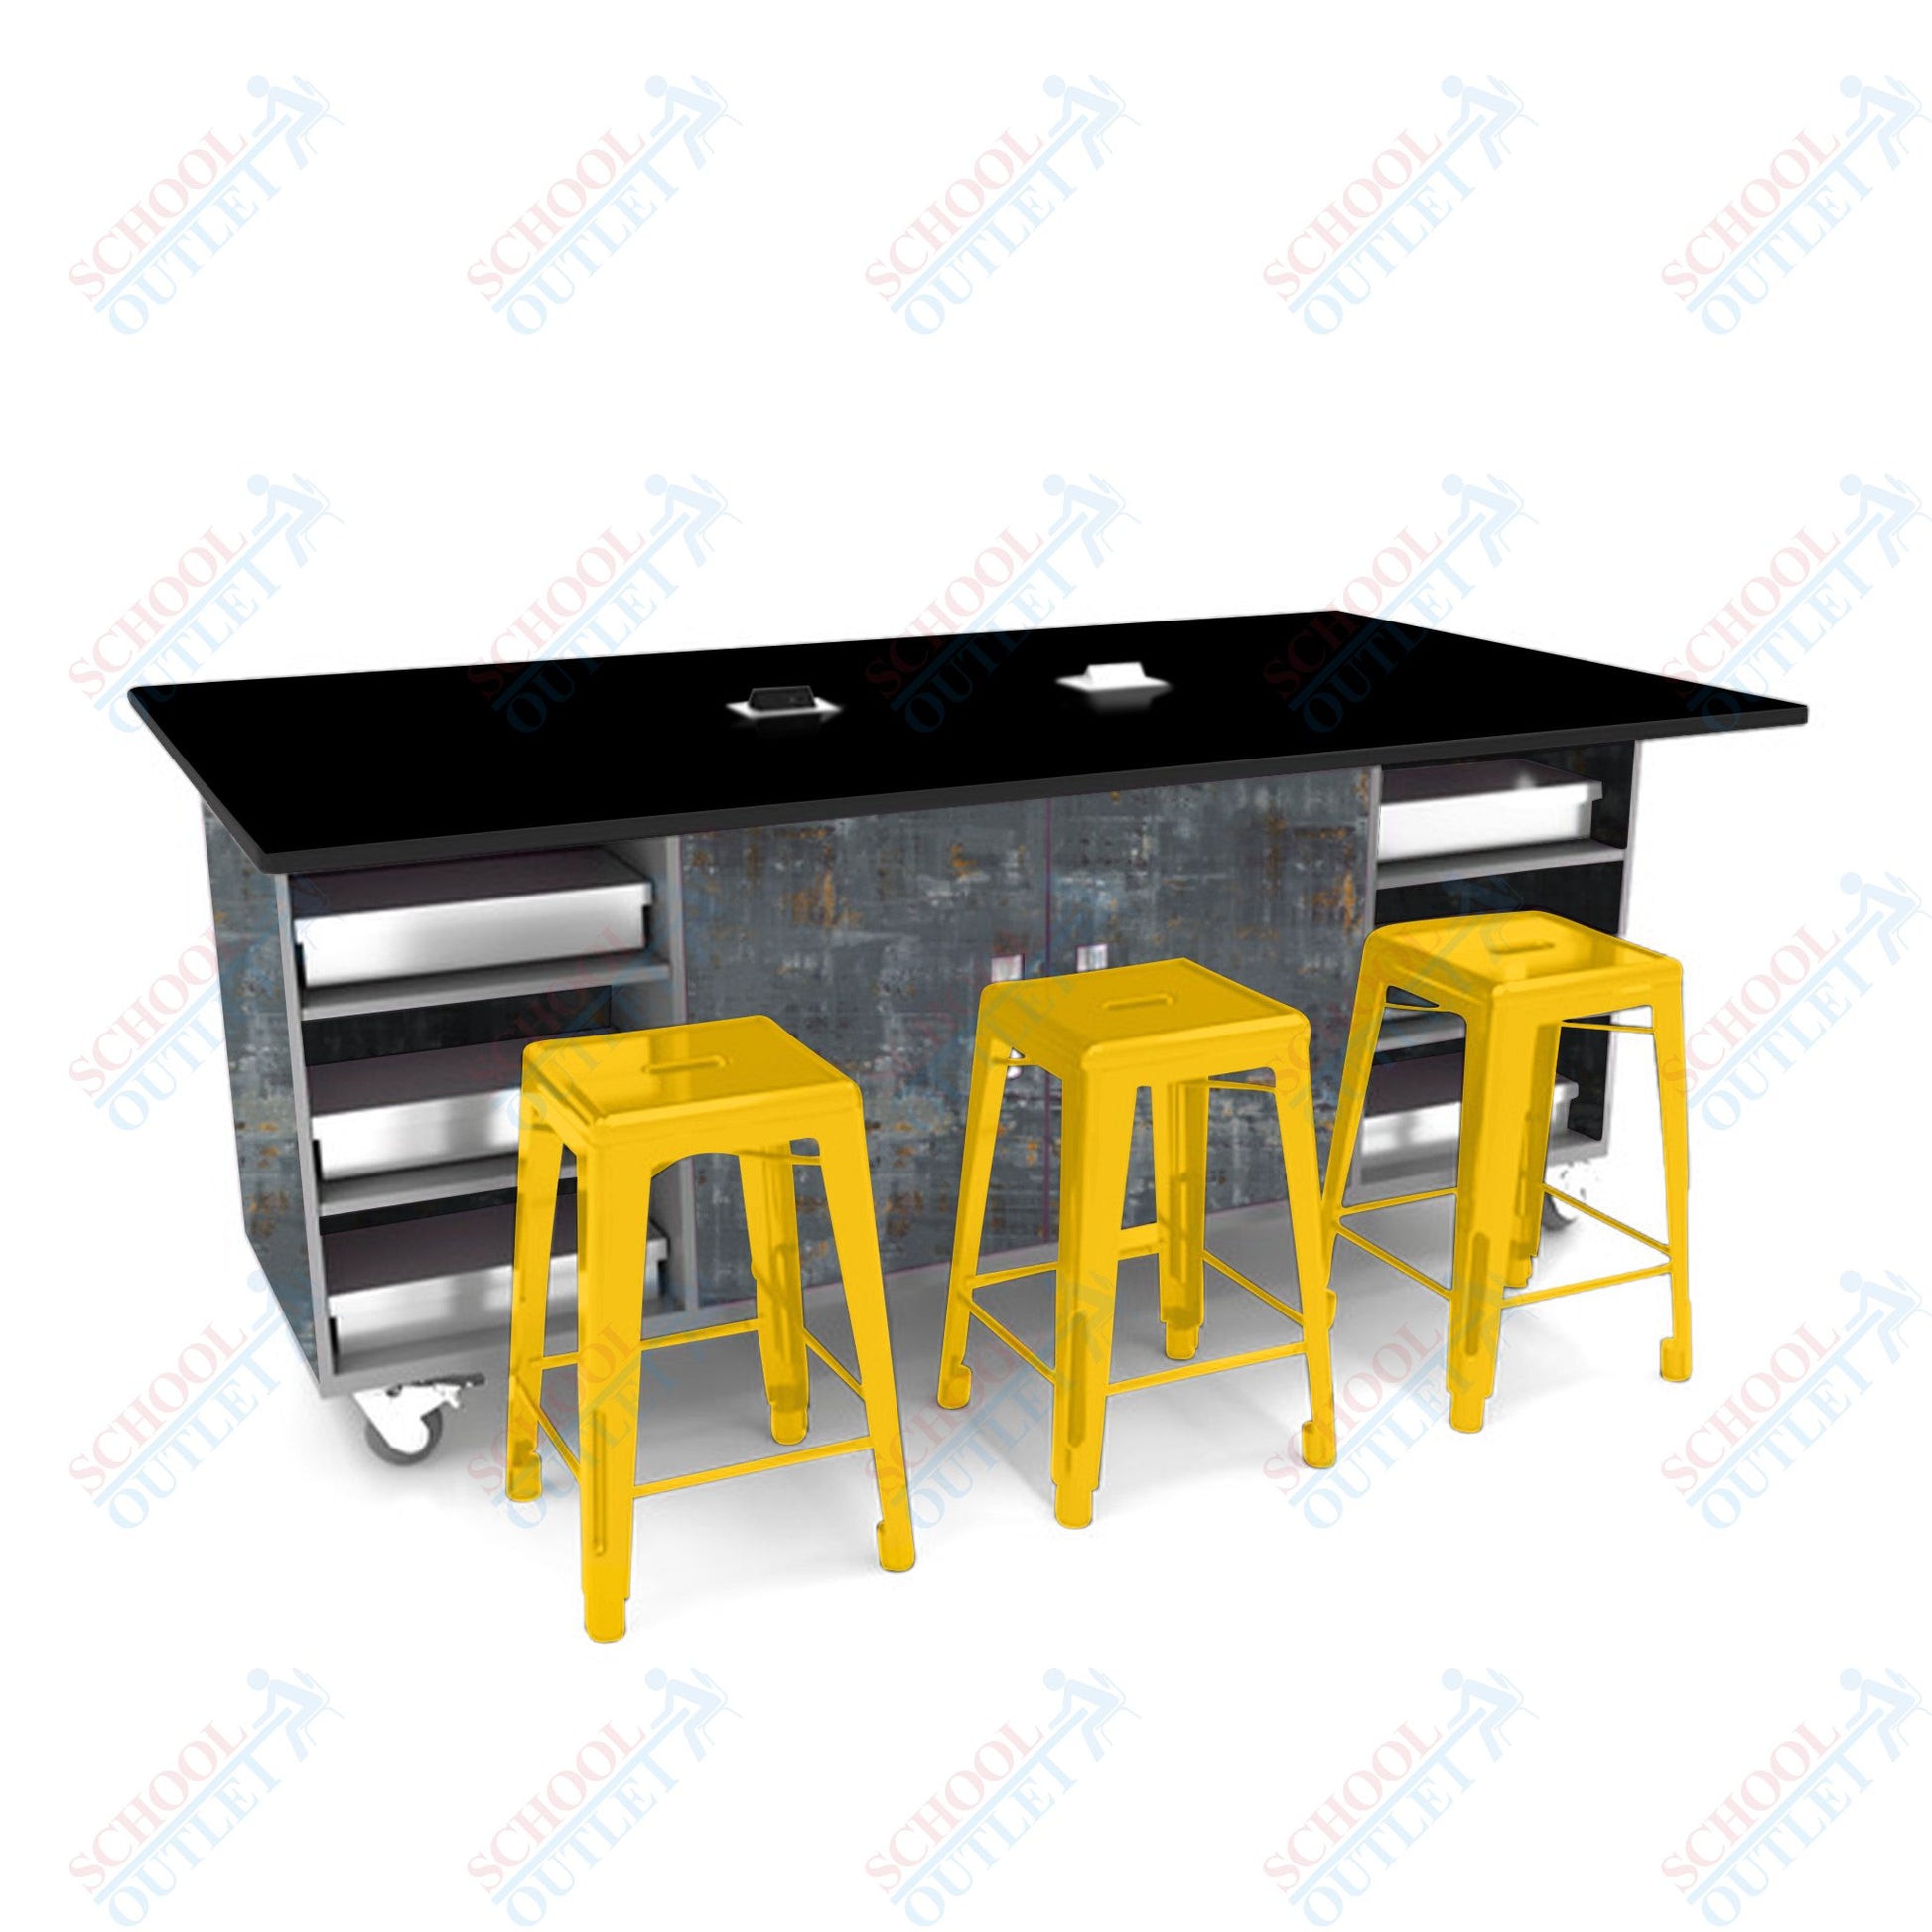 CEF ED Double Table 42"H Tough Top, Laminate Base with 6 Stools, Storage bins, and Electrical Outlets Included. - SchoolOutlet